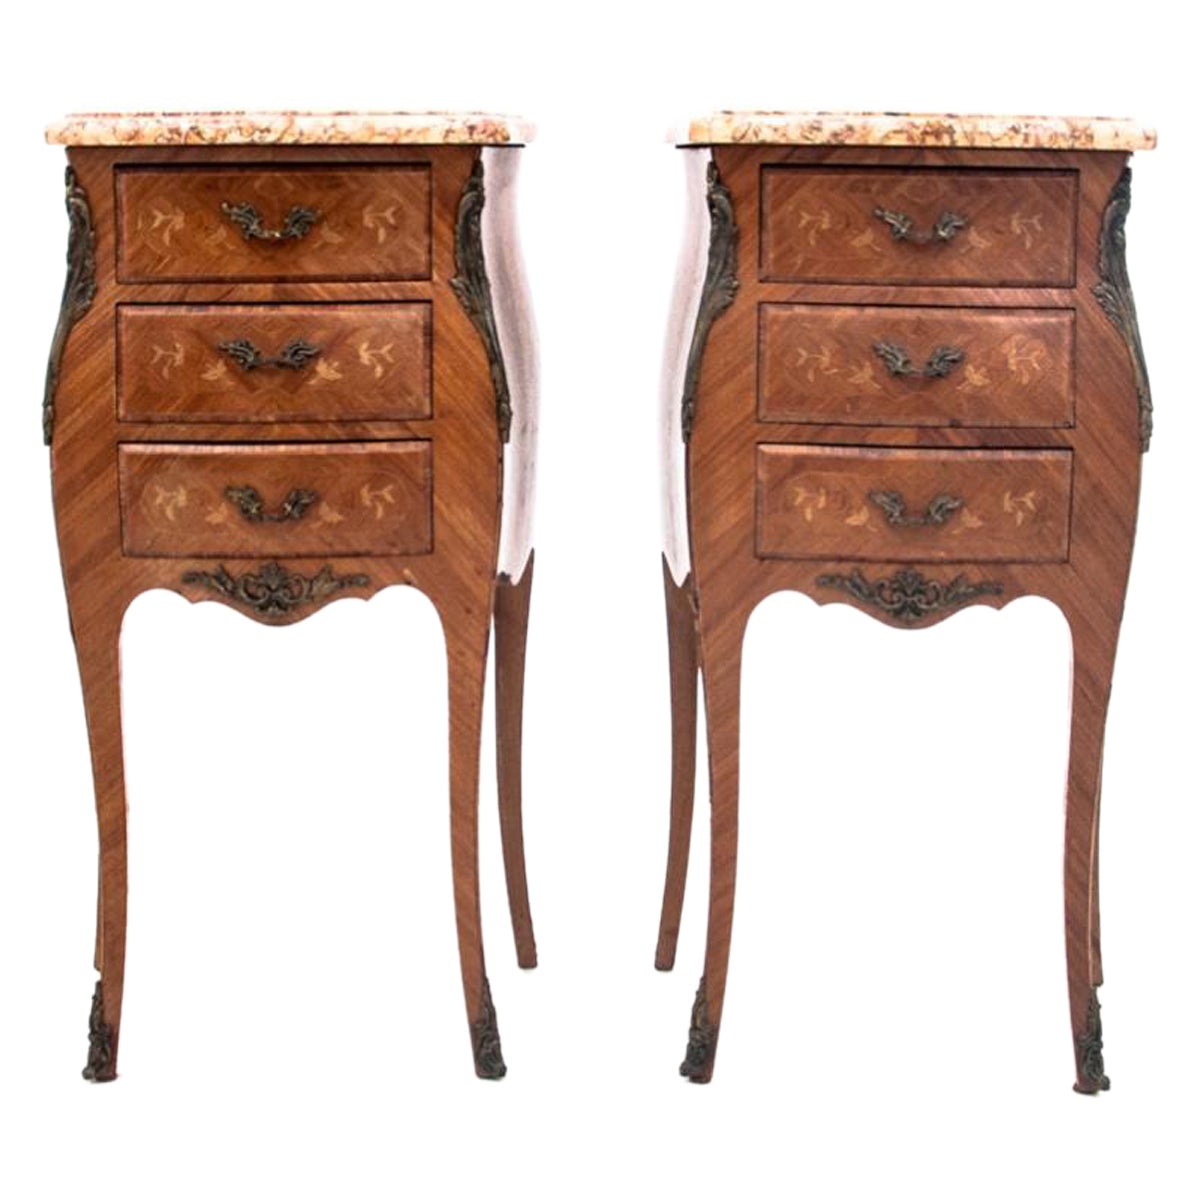 What were nightstands called in the 1800s?